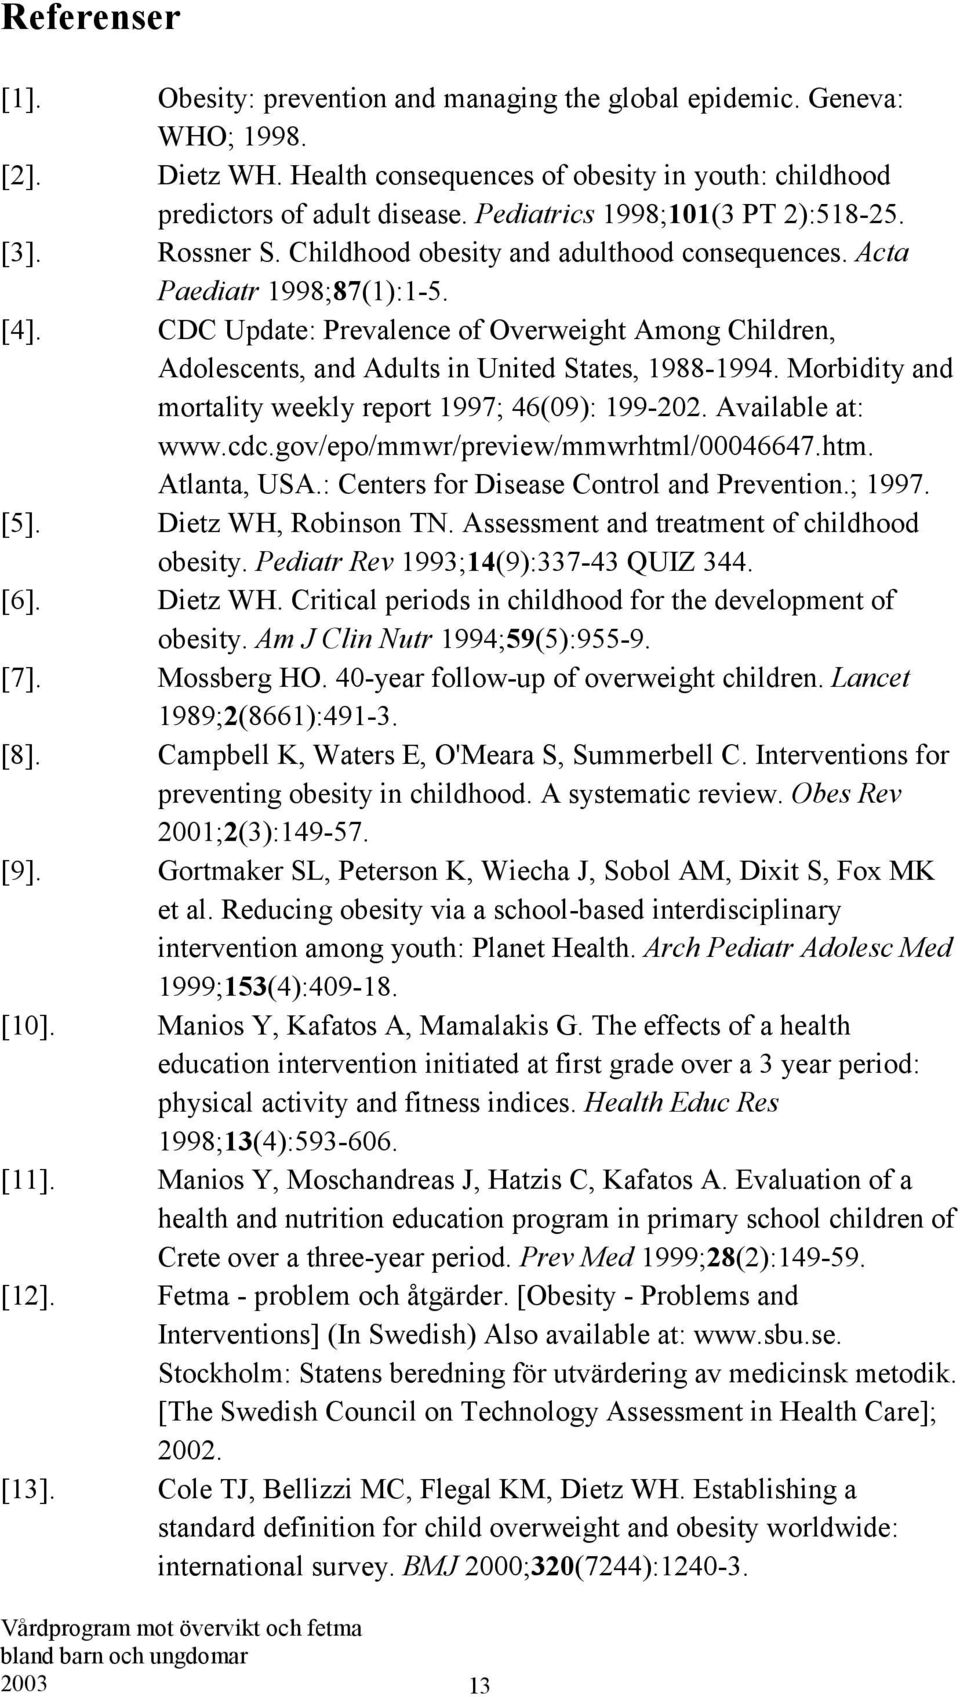 CDC Update: Prevalence of Overweight Among Children, Adolescents, and Adults in United States, 1988-1994. Morbidity and mortality weekly report 1997; 46(09): 199-202. Available at: www.cdc.